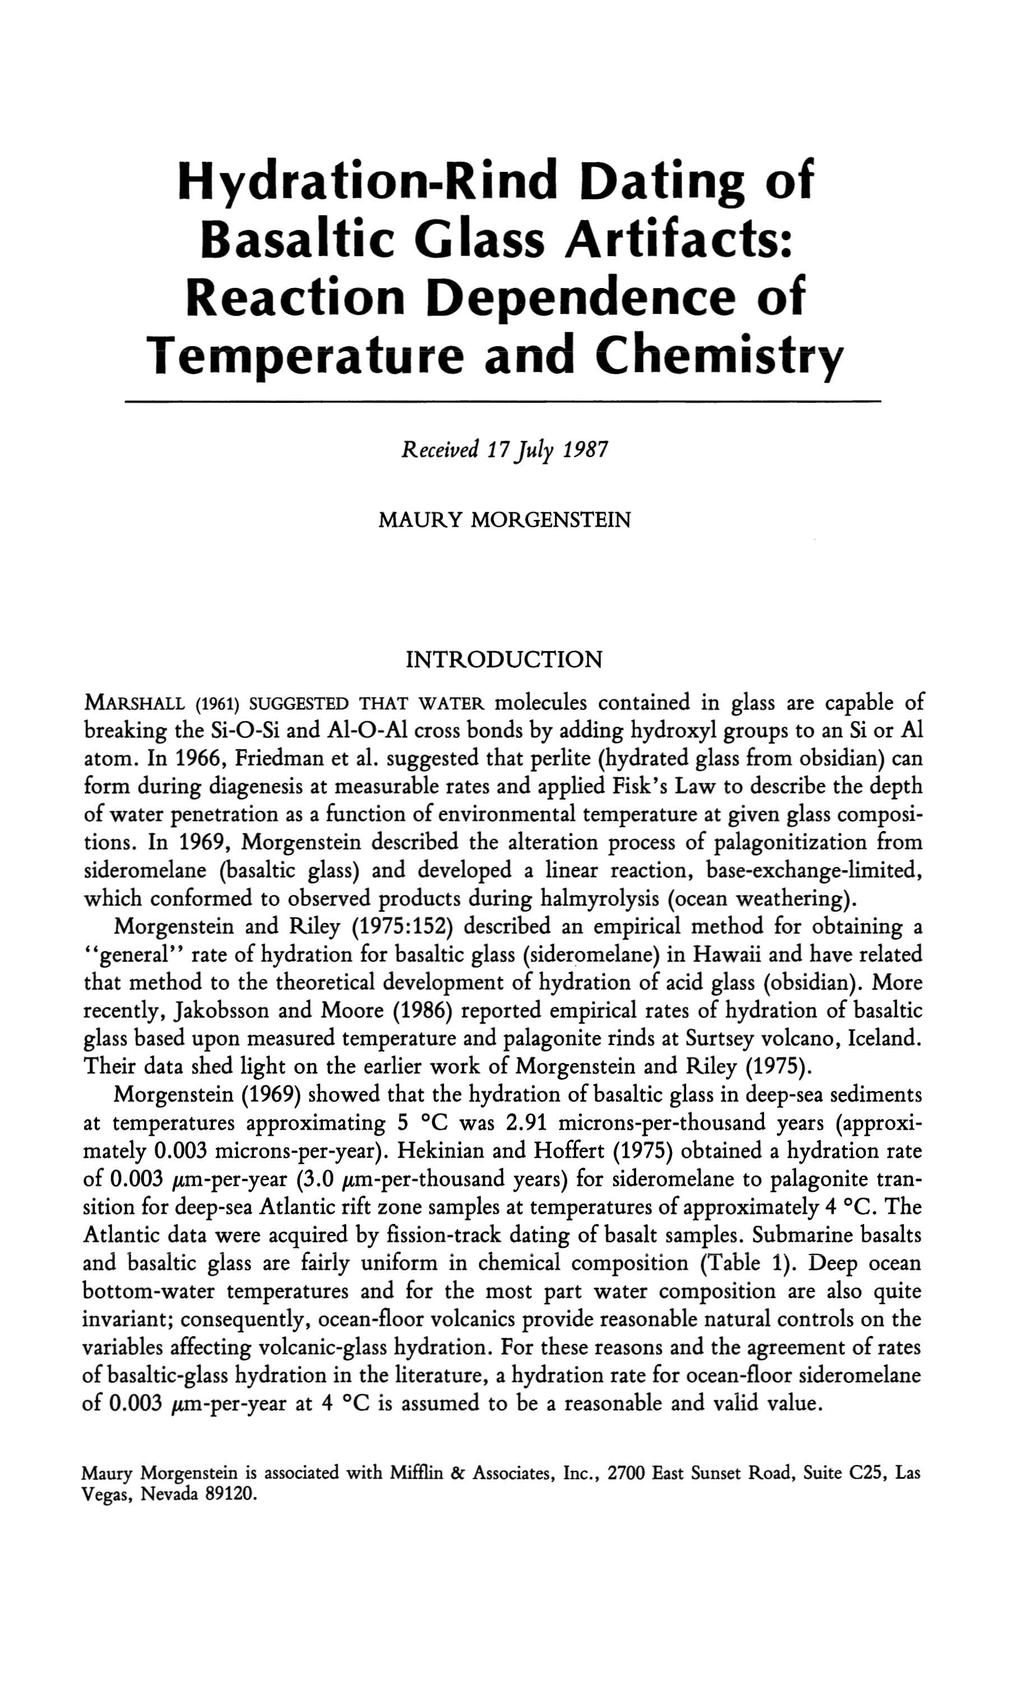 Hydration-Rind Dating of Basaltic G lass Artifacts: Reaction Dependence of Temperature and Chemistry Received 17July 1987 MAURY MORGENSTErN INTRODUCTION MARSHALL (1961) SUGGESTED THAT WATER molecules